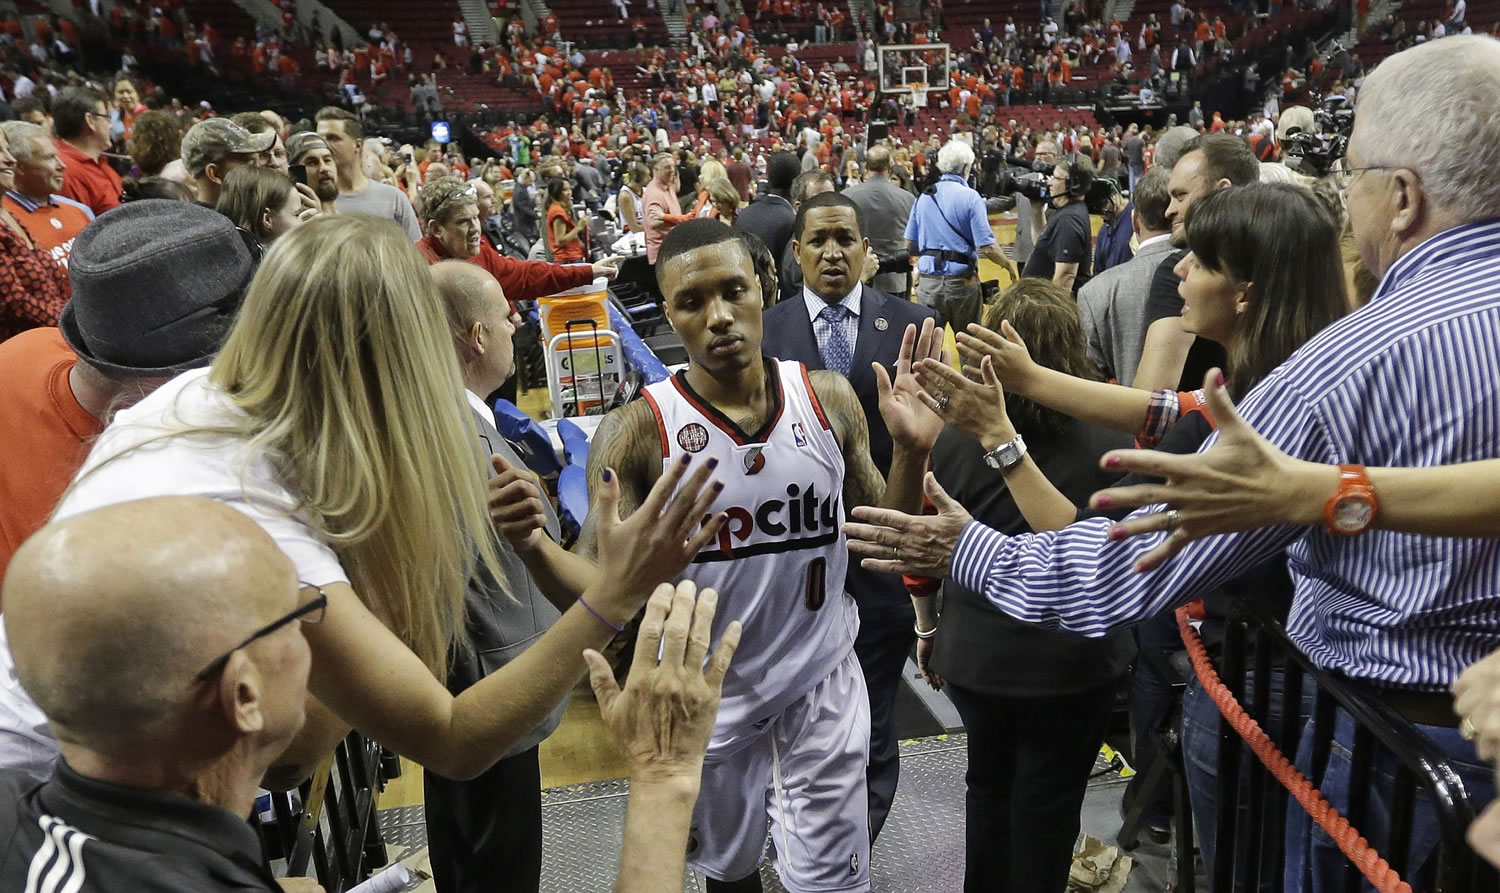 Portland Trail Blazers' Damian Lillard (0) walks off the court as fans reach for him following Game 4 of a Western Conference semifinal NBA basketball playoff series against the San Antonio Spurs, Monday, May 12, 2014, in Portland, Ore. The Trail Blazers won 103-92.